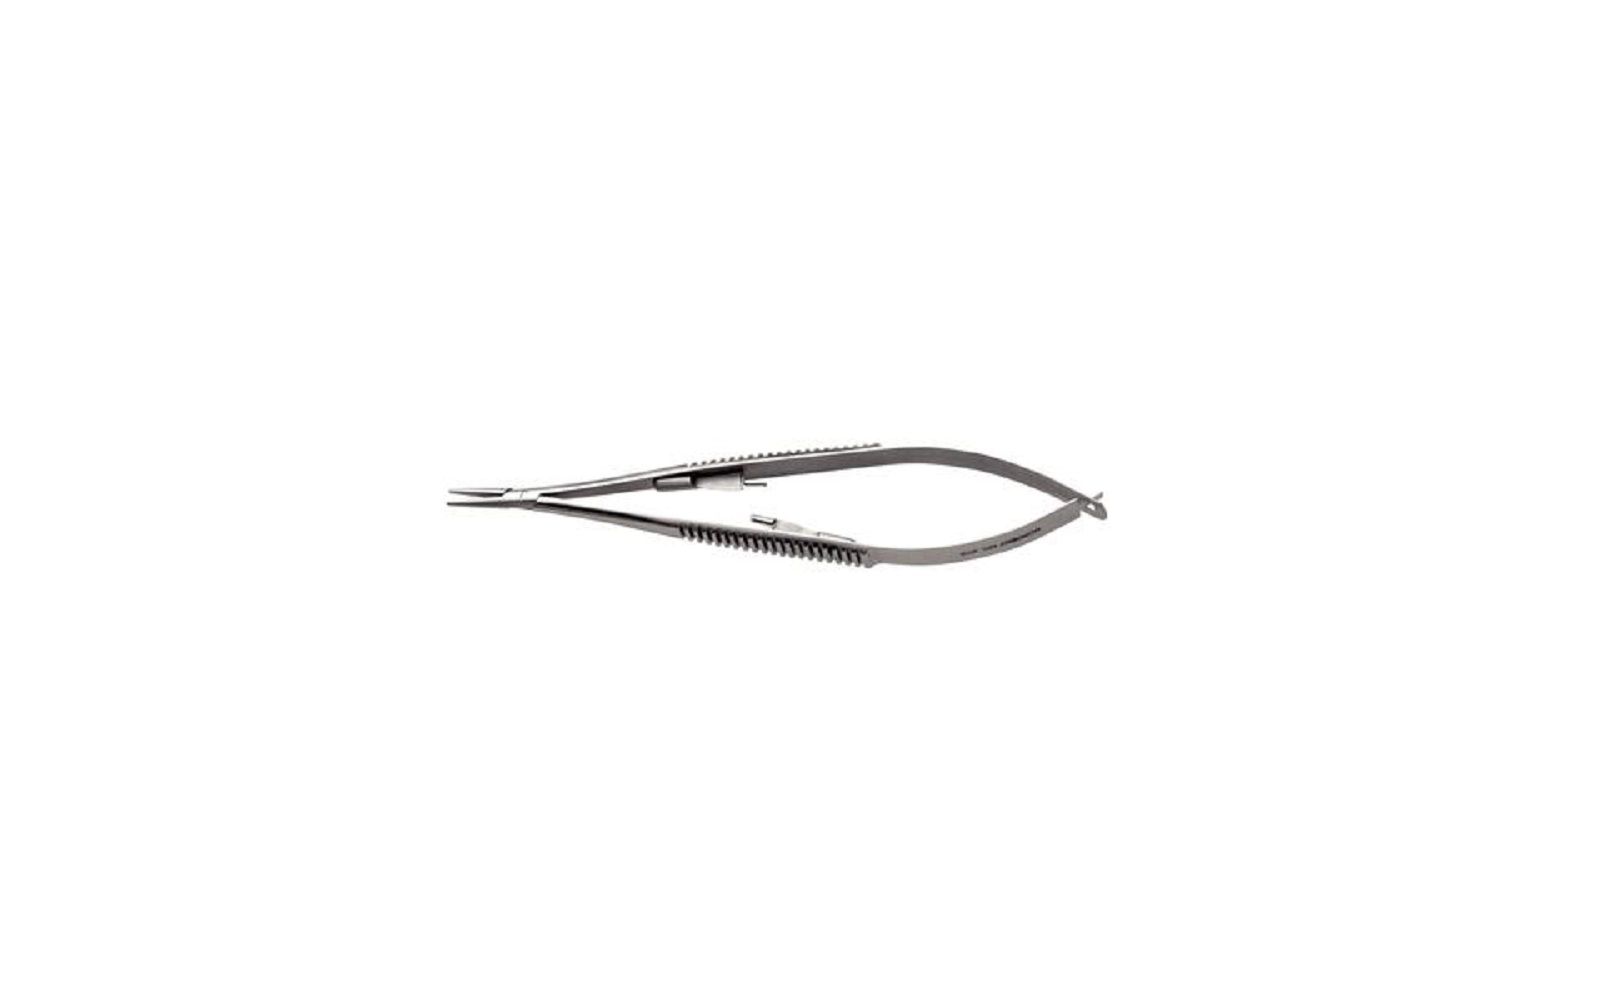 Castroviejo needle holder – # 209, stainless steel jaws, 5"